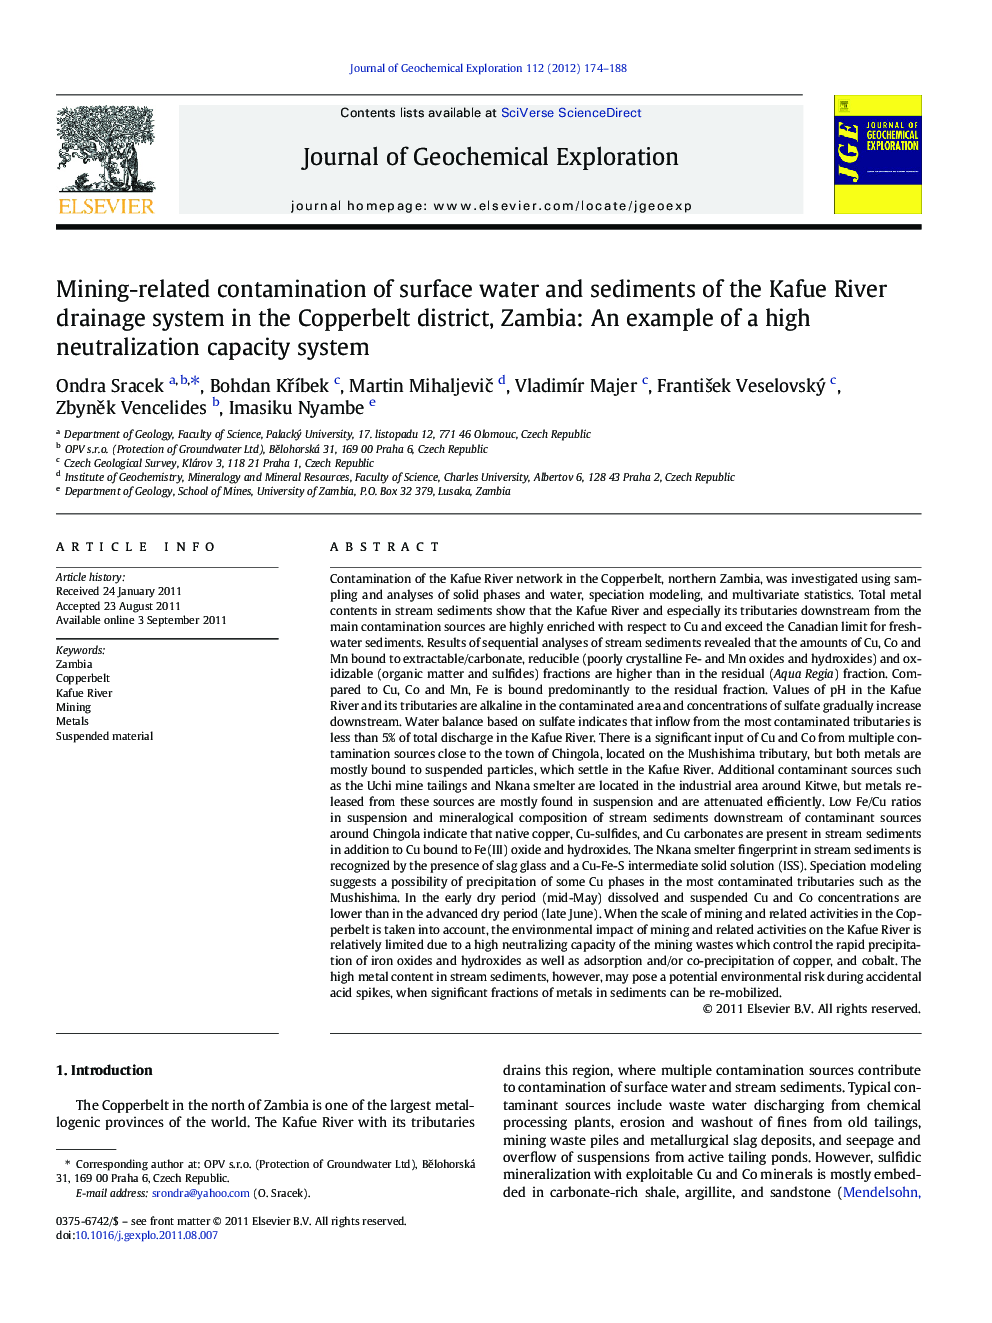 Mining-related contamination of surface water and sediments of the Kafue River drainage system in the Copperbelt district, Zambia: An example of a high neutralization capacity system